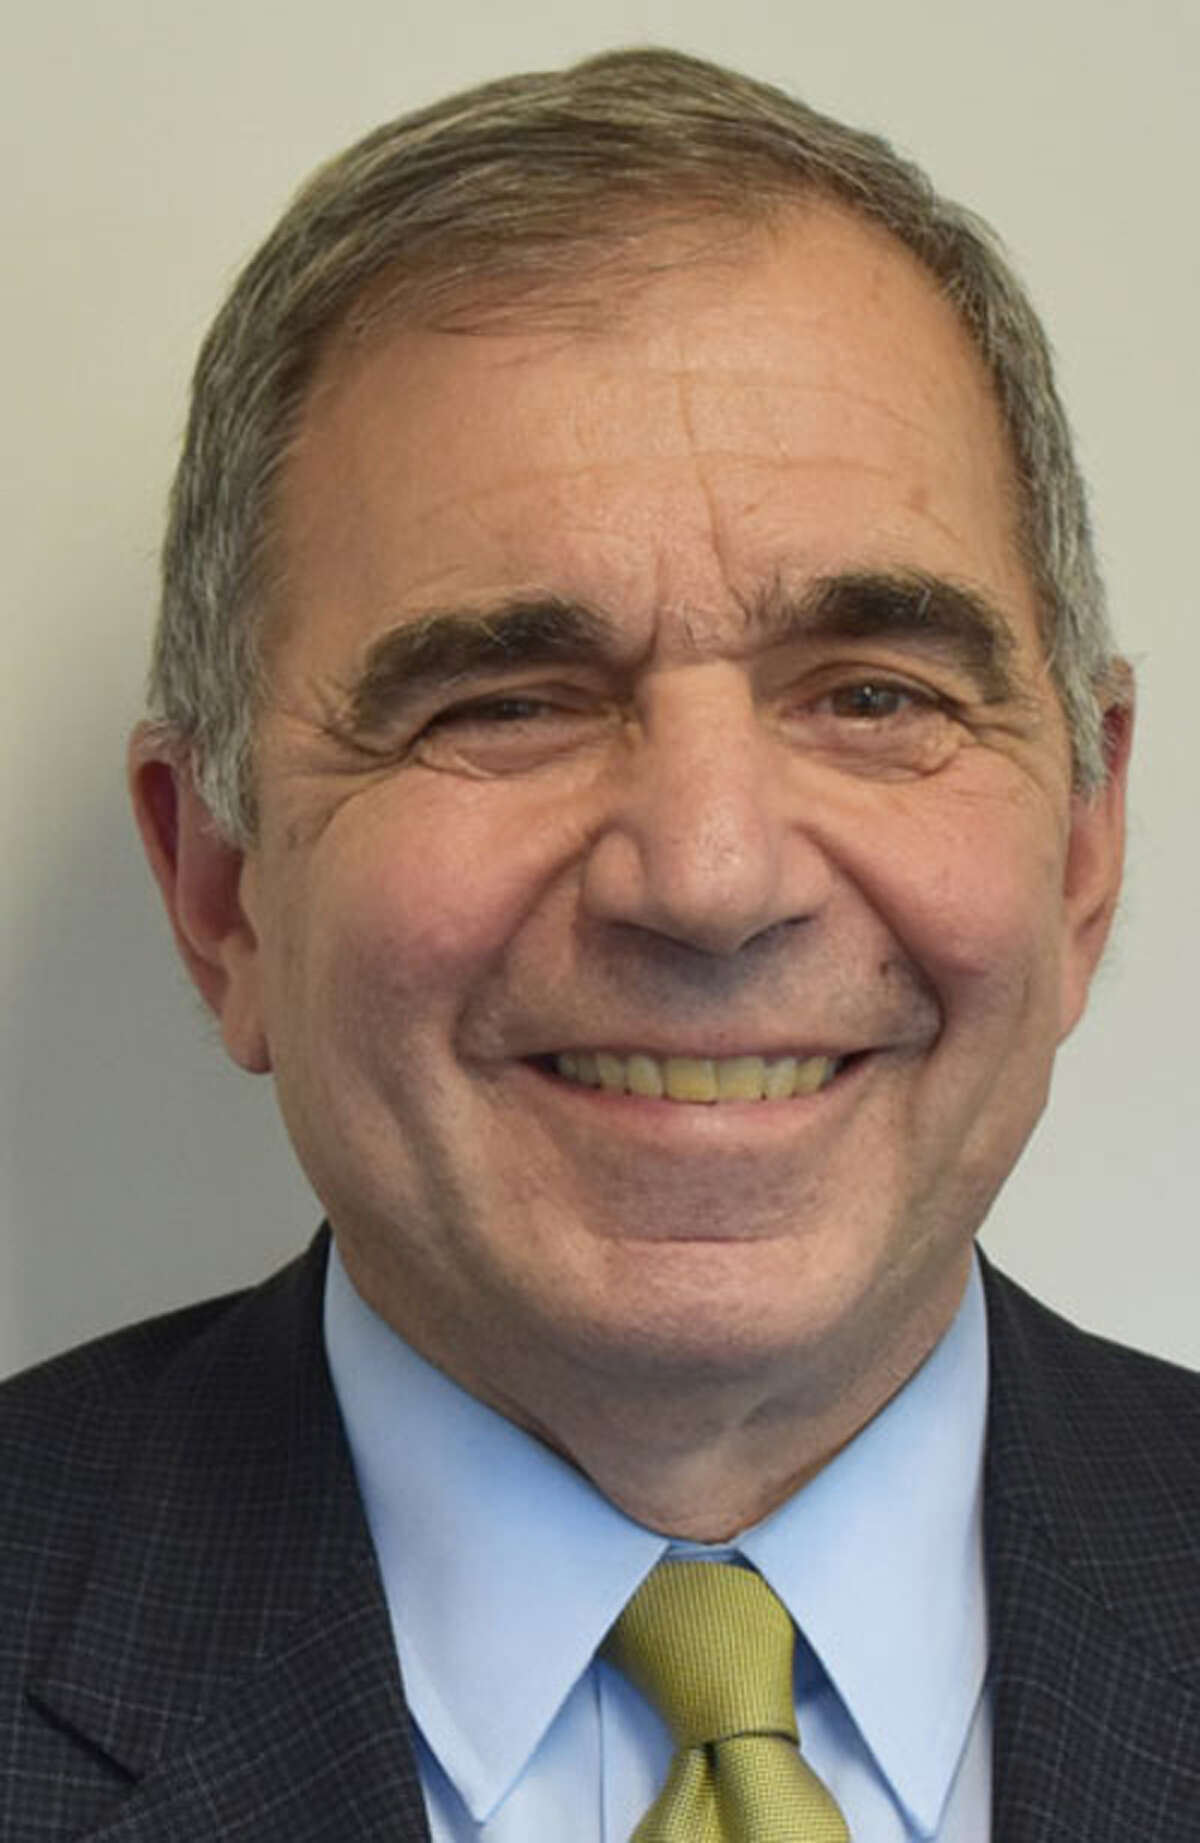 Former Greenwich educator John Grasso has been named interim principal at South School in New Canaan, Conn. John Grasso / New Canaan School District / Contributed photo